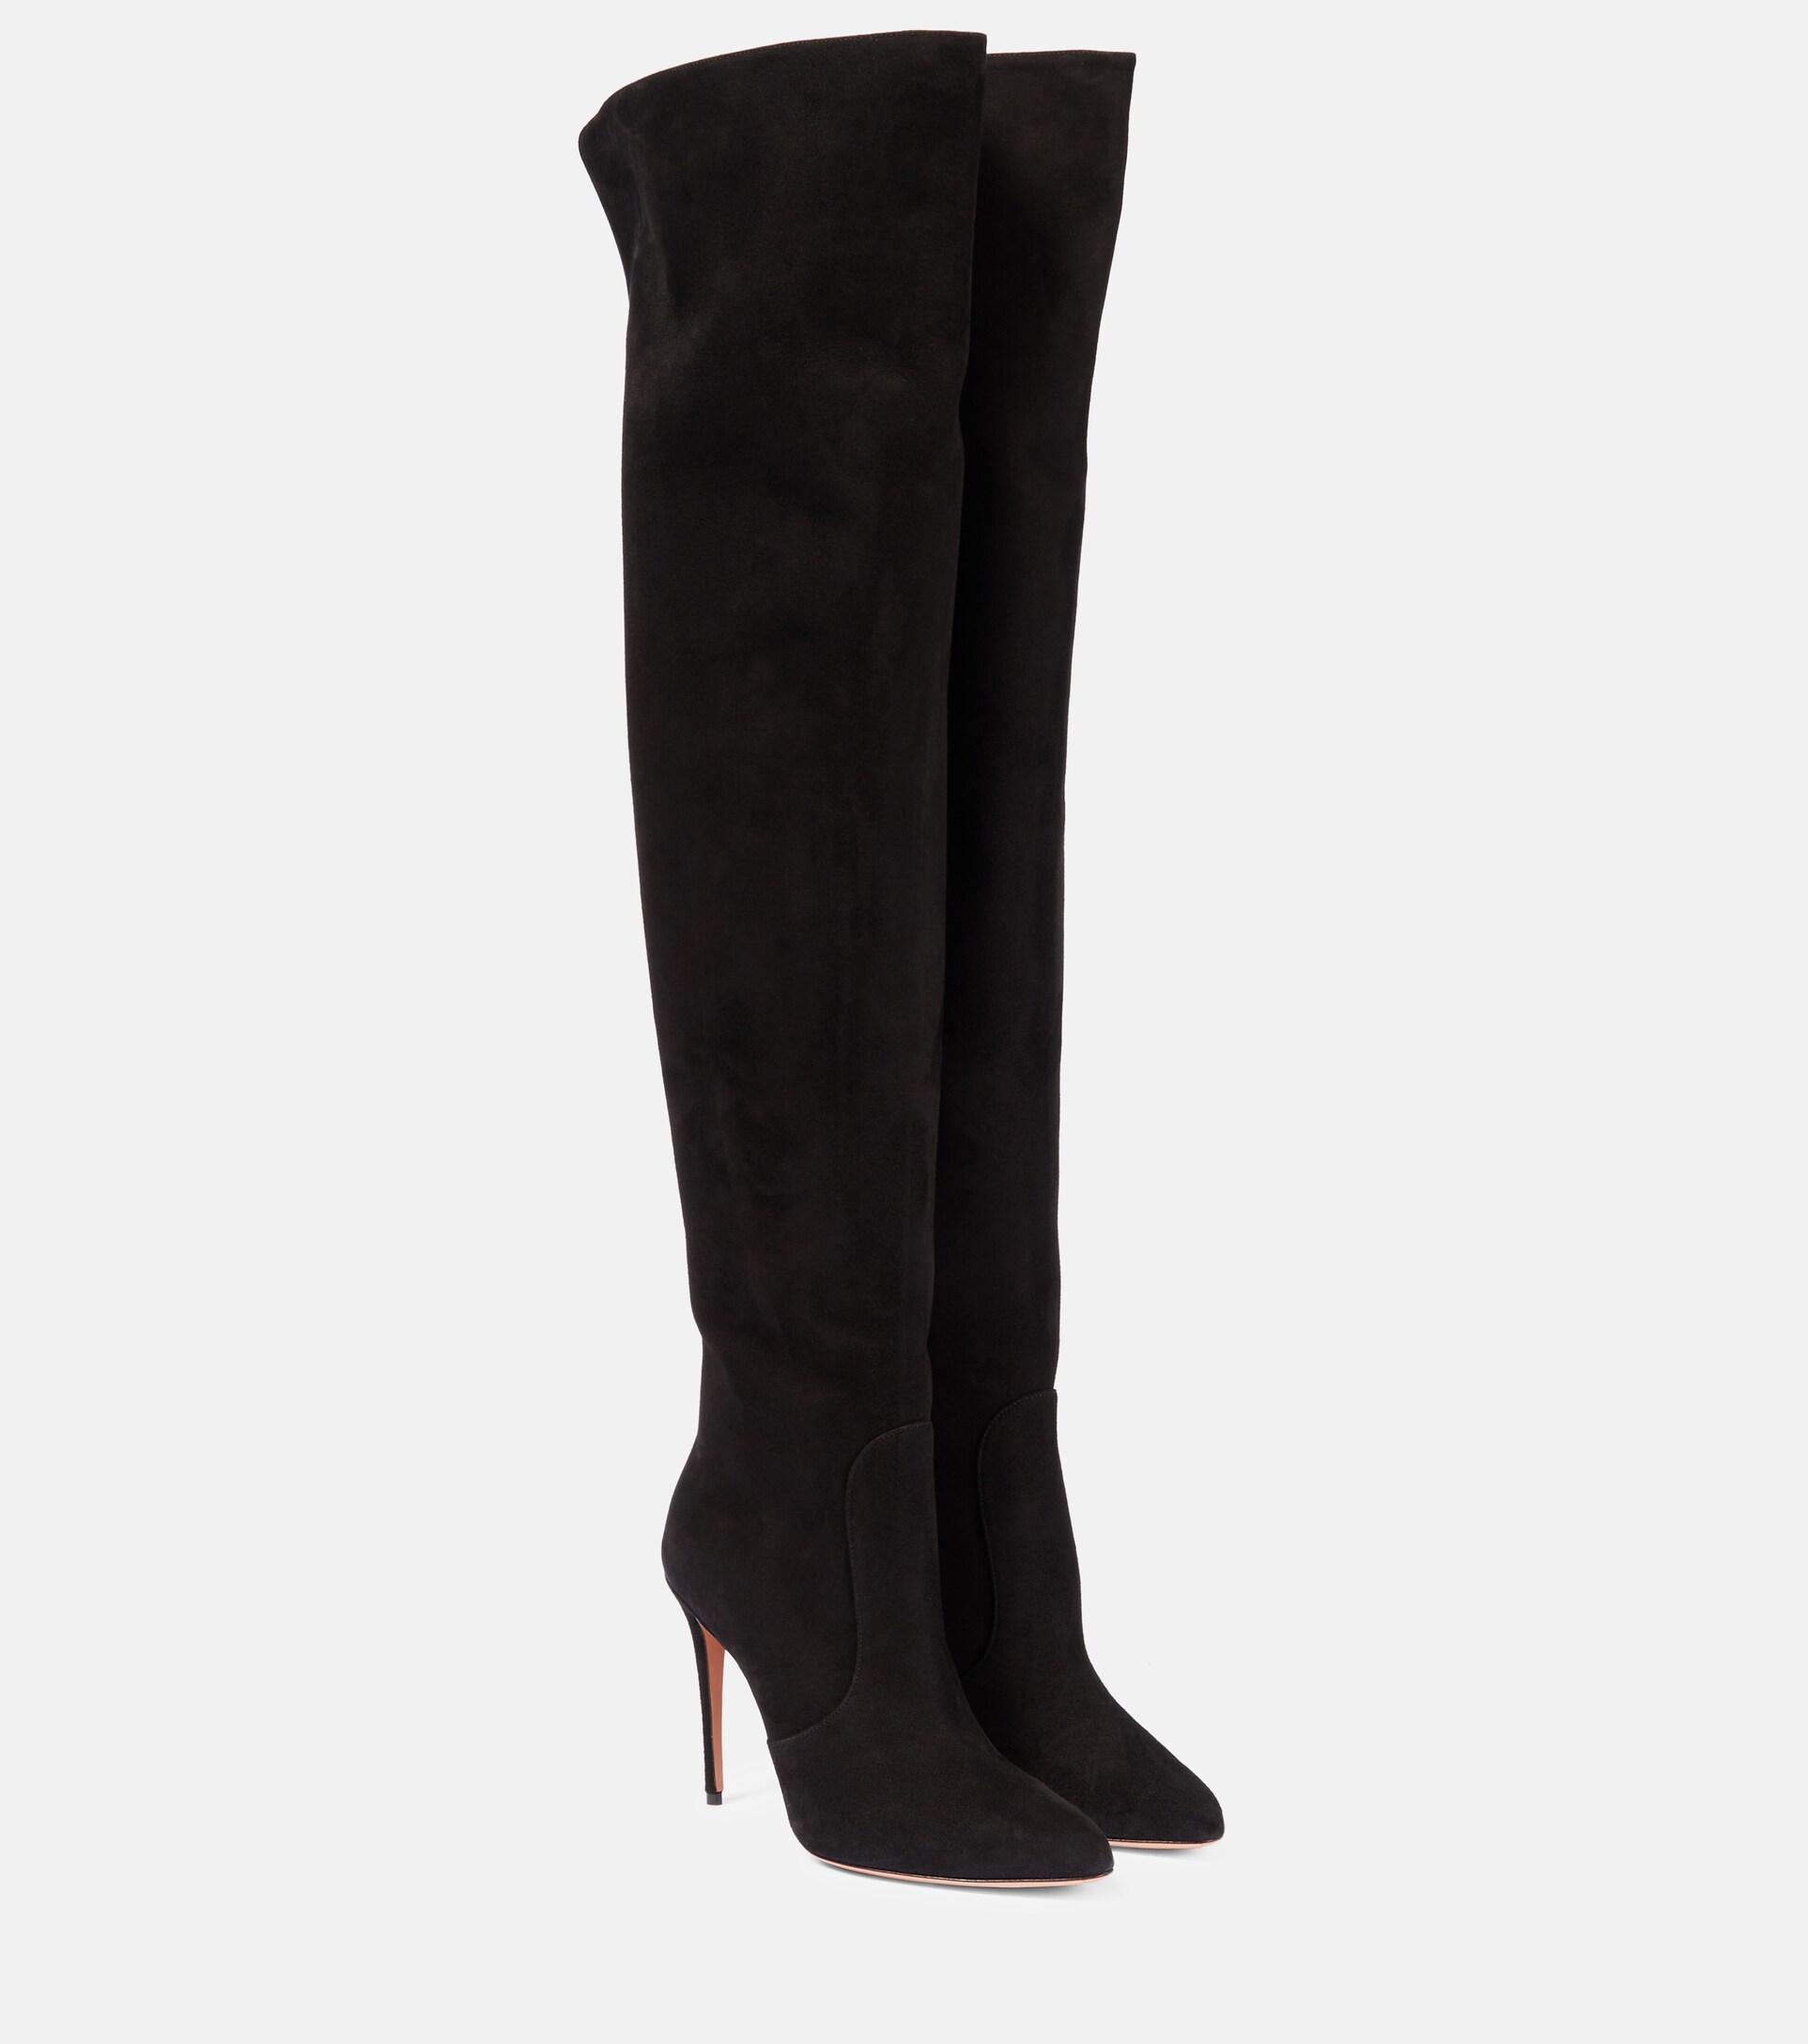 Aquazzura Liaison Suede Over-the-knee Boots in Black | Lyst